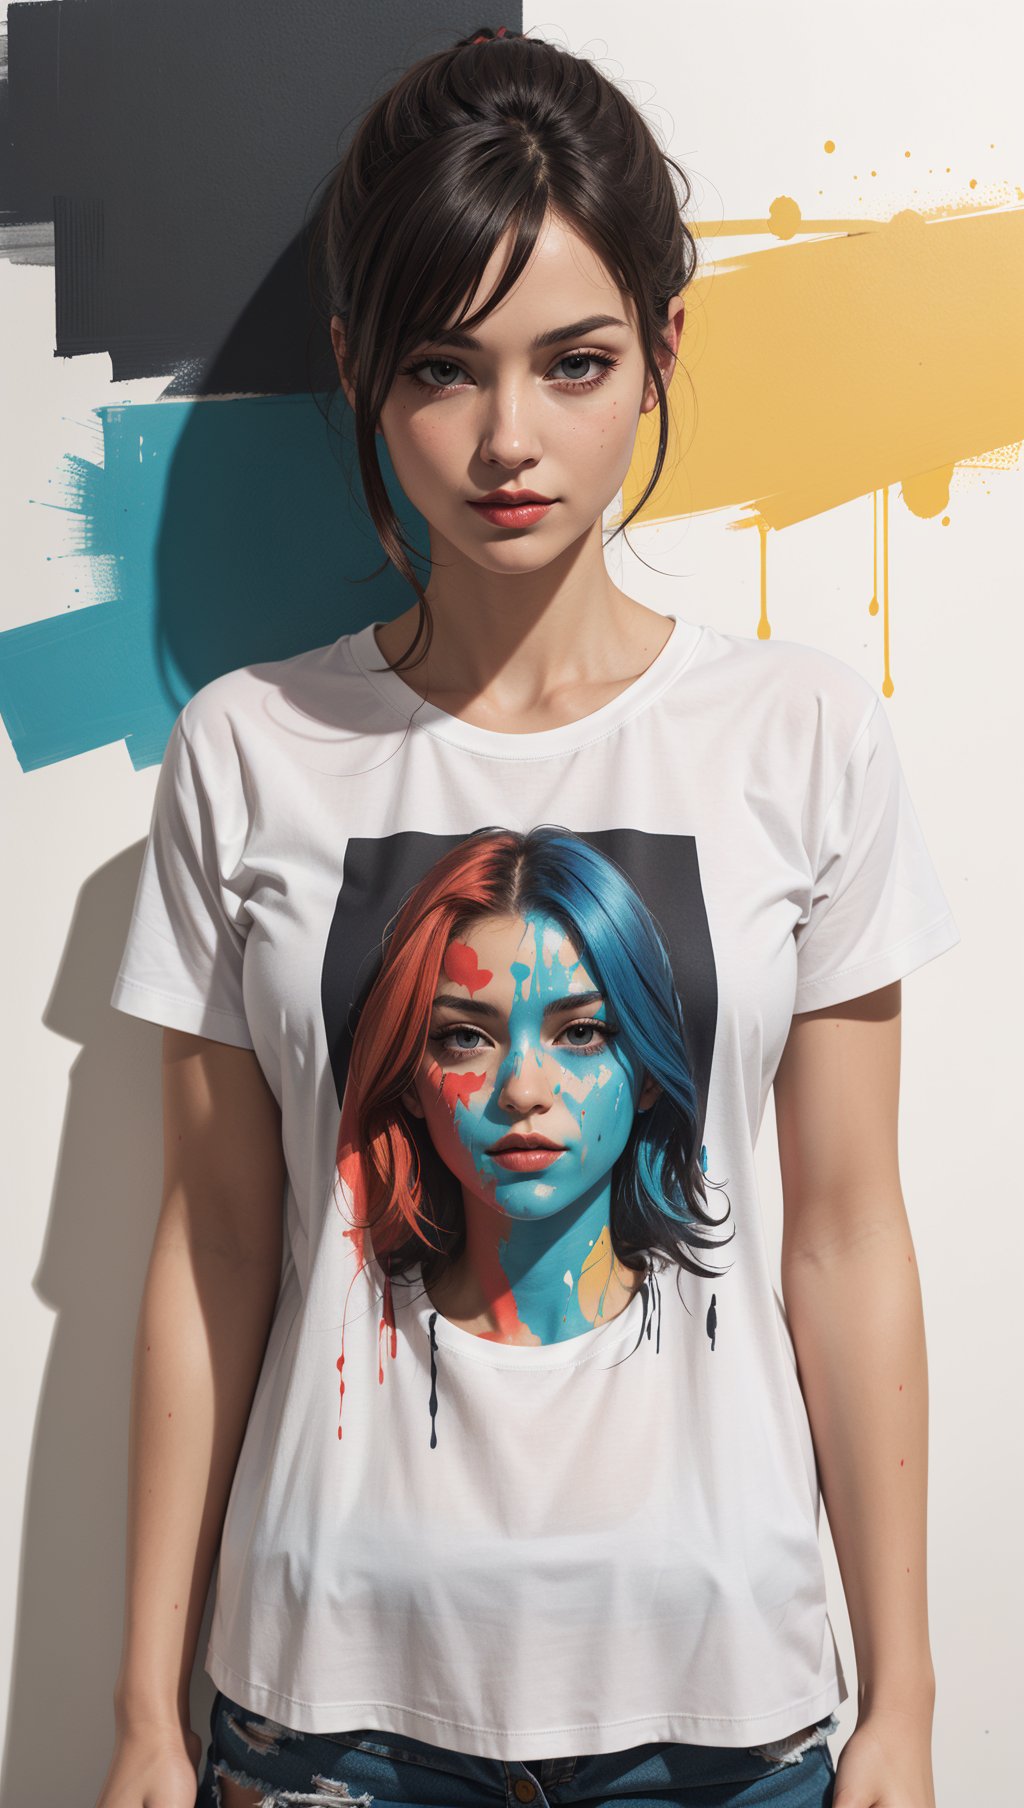 A color poster of a mixture of graffiti and paint on a wall,portrait of a woman,upperbody,wearing white t-shirt,minimalist,with dynamic movement and bold colors,mixture,